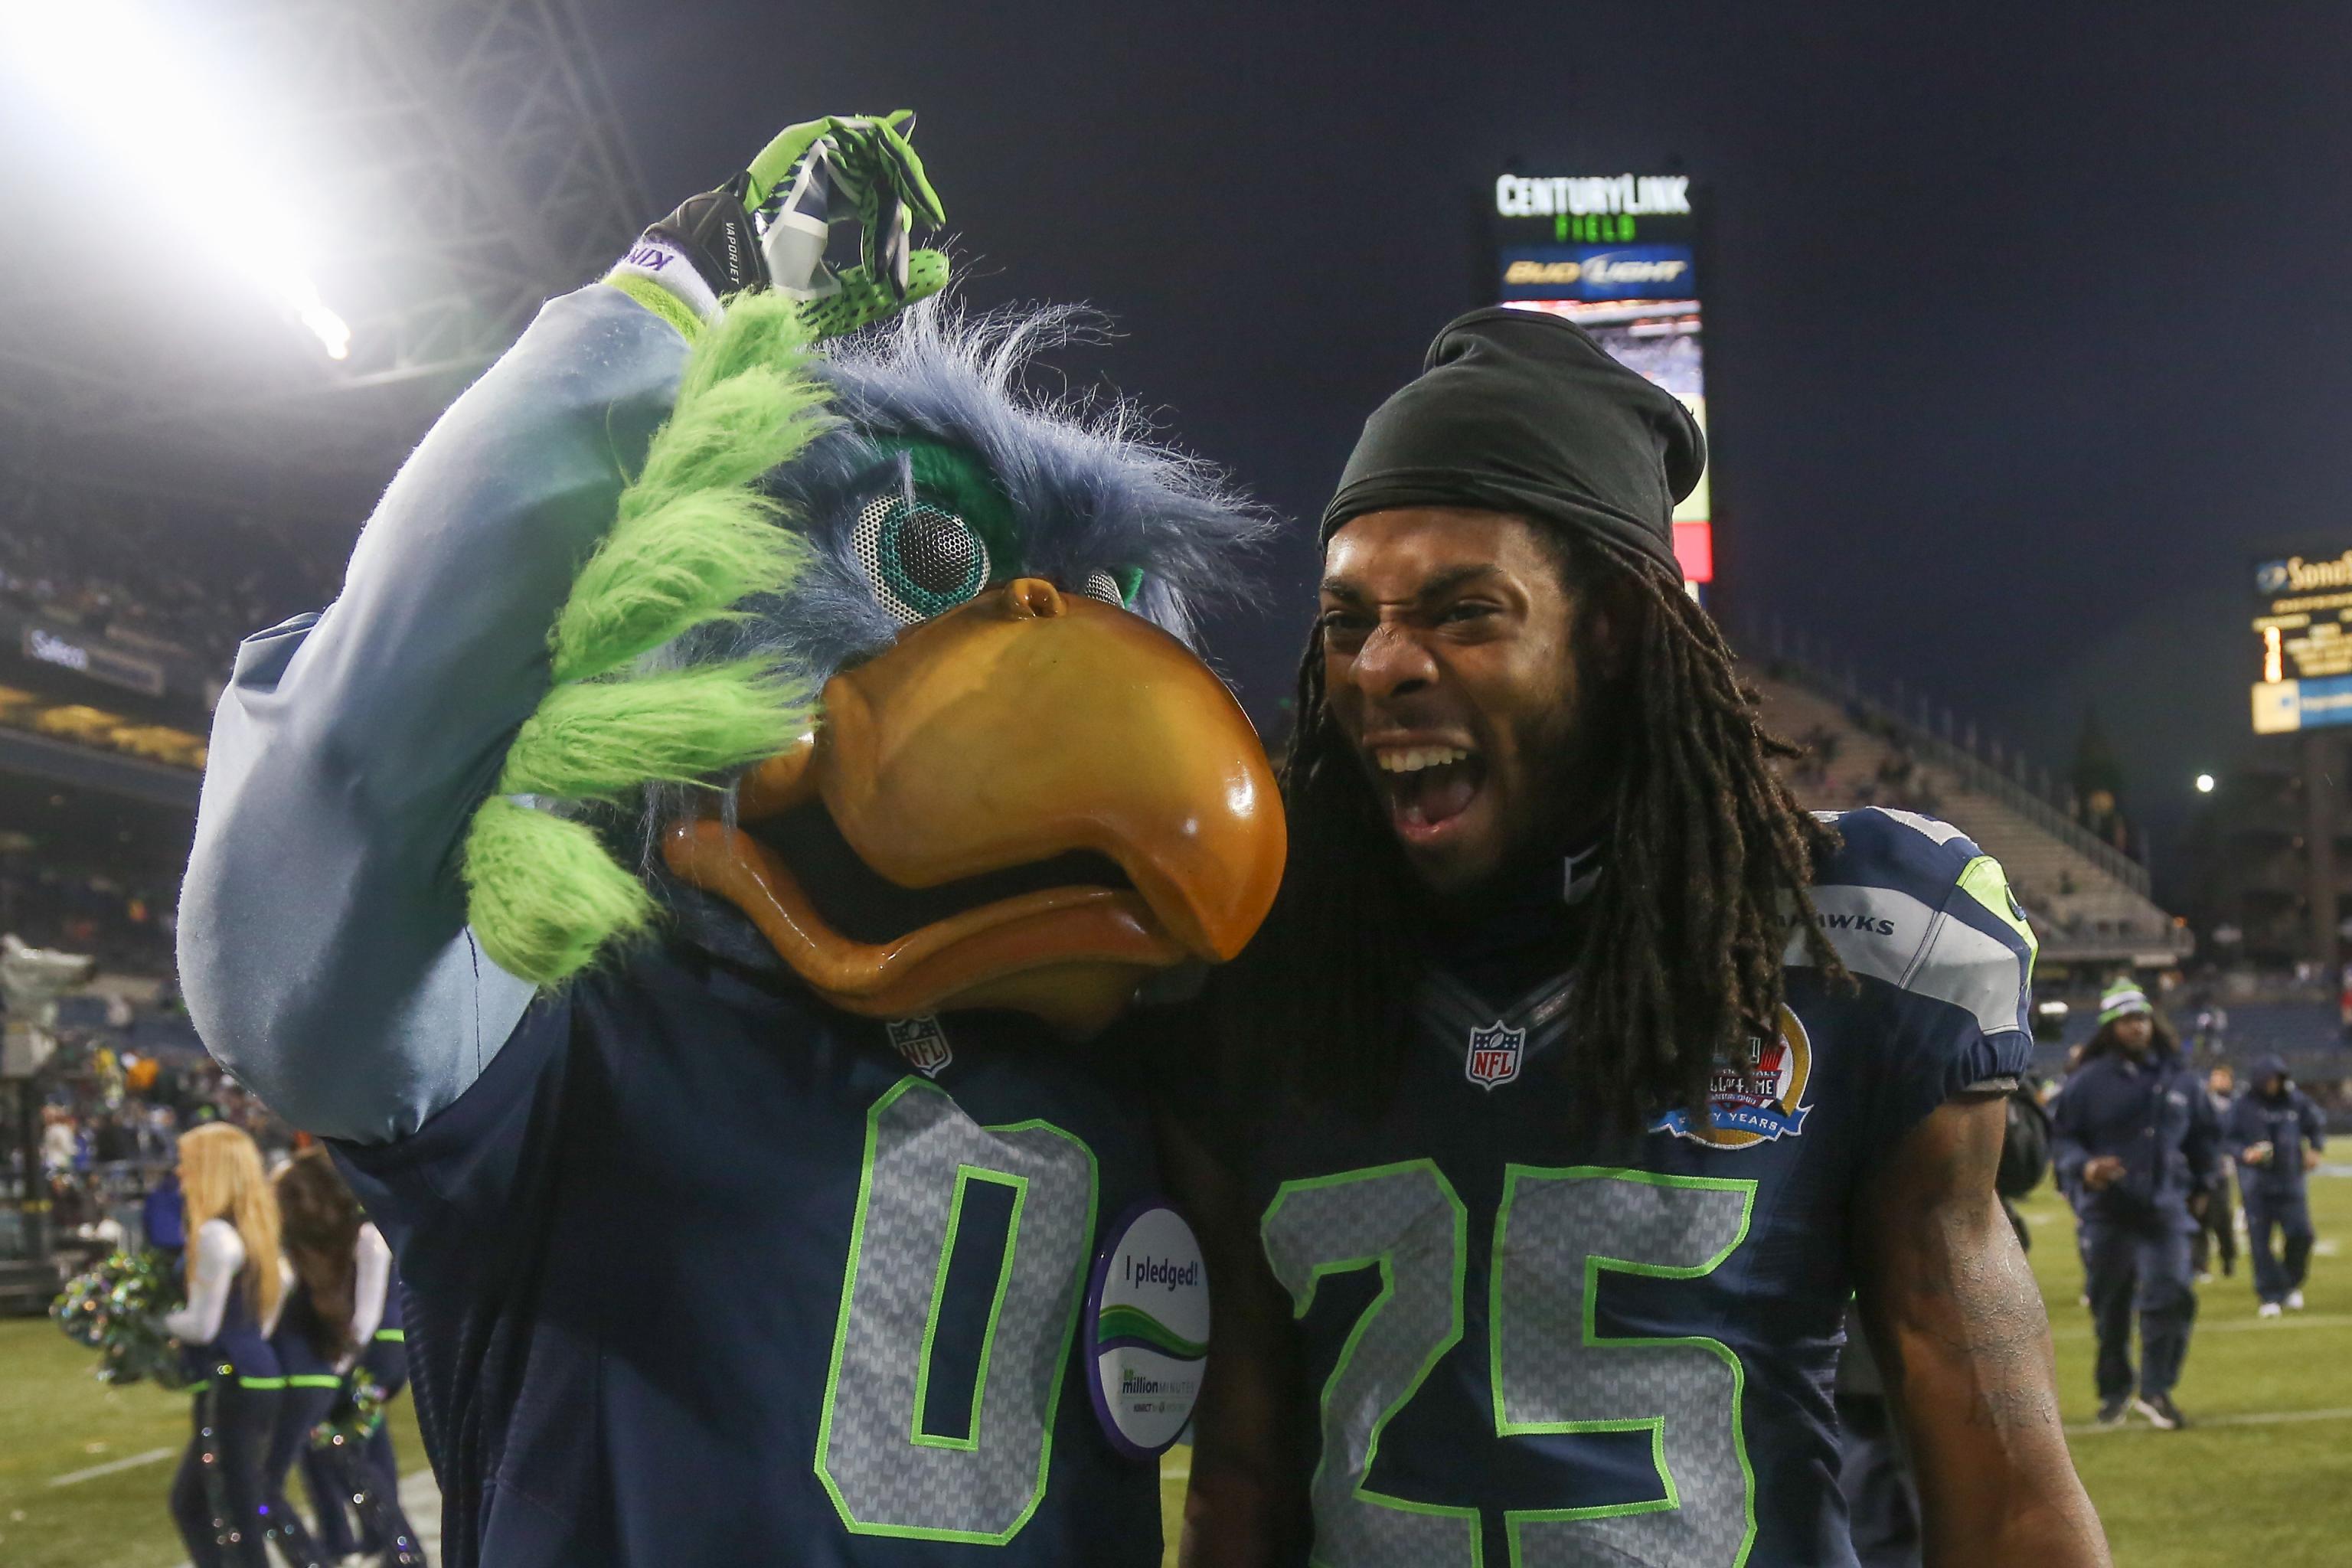 News and notes on the Seattle Seahawks - Revenge of the Birds